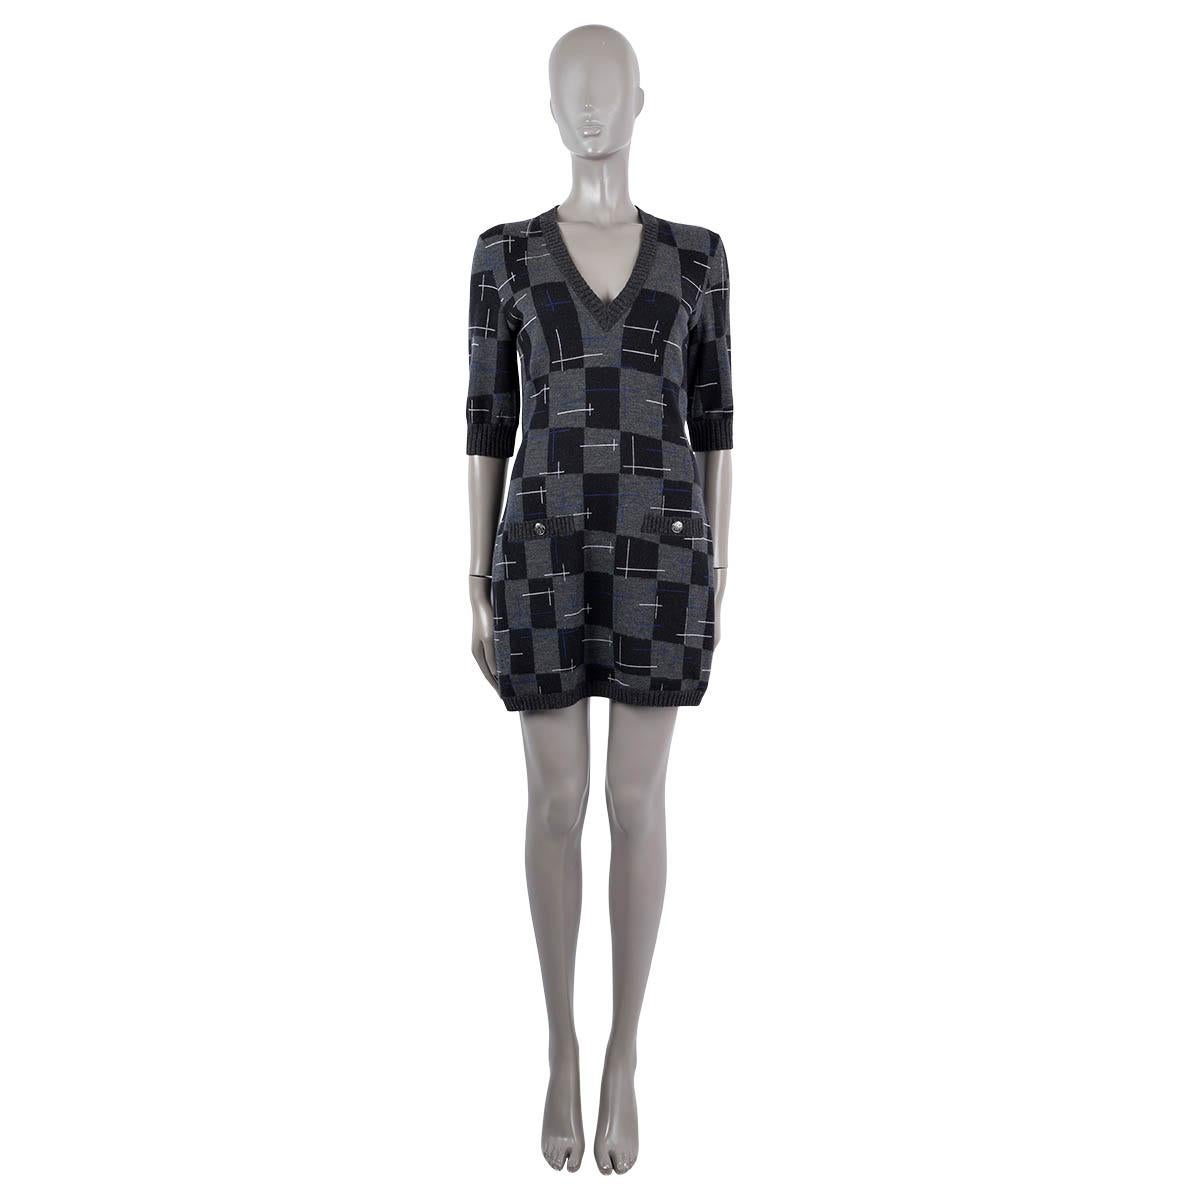 100% authentic Chanel mini check knit dress in grey, black, white, blue, red and pink cashmere (57%), wool (25%) and silk (18%). Features a V-neck, half sleeves, two buttoned logo pockets on the front and Coco Chanel writing on the back. Has been